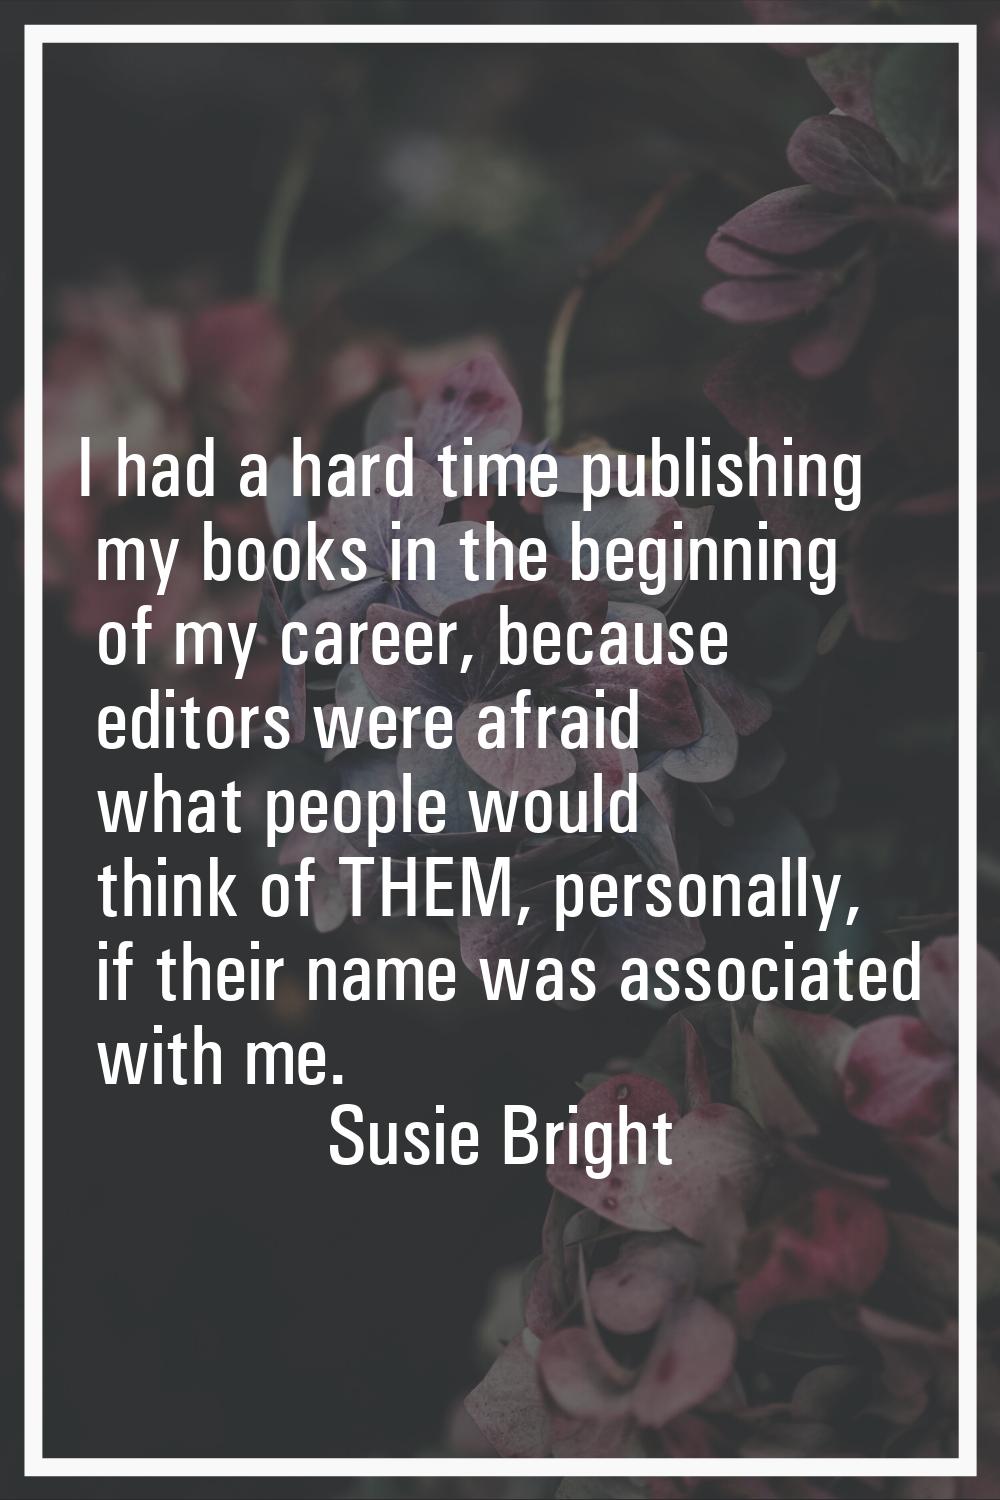 I had a hard time publishing my books in the beginning of my career, because editors were afraid wh